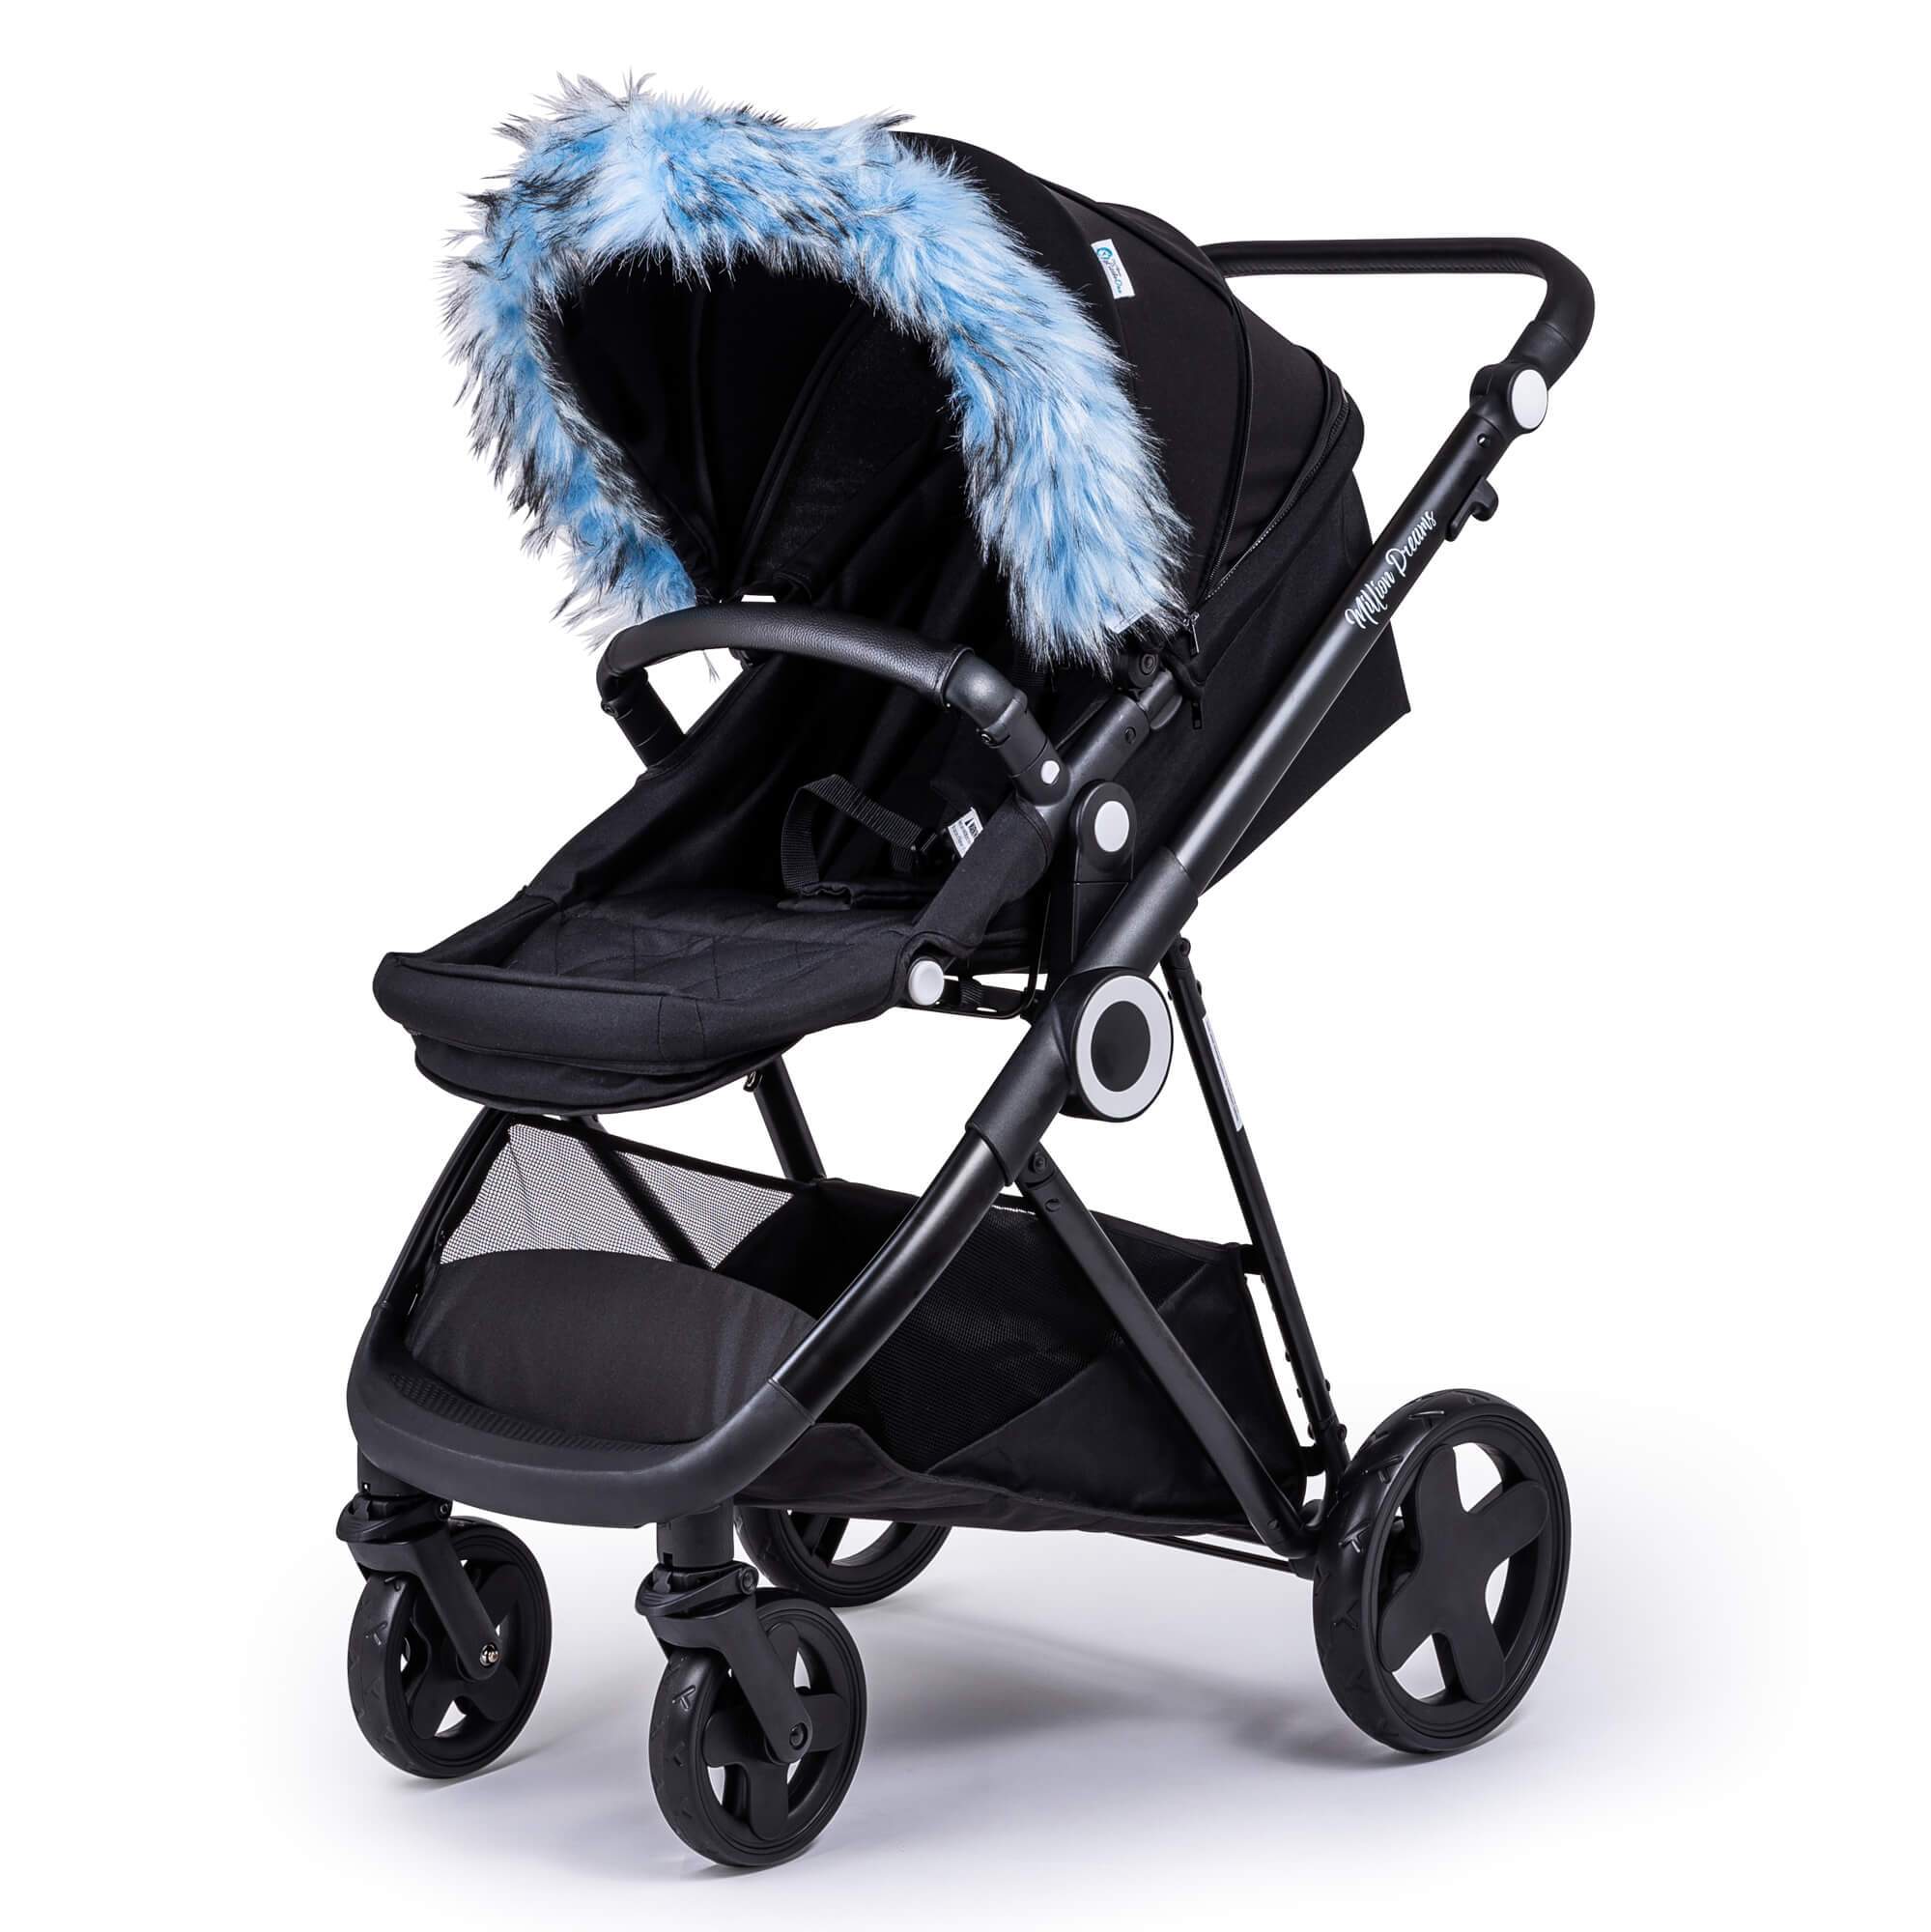 Pram Fur Hood Trim Attachment for Pushchair Compatible with Norton - Light Blue / Fits All Models | For Your Little One